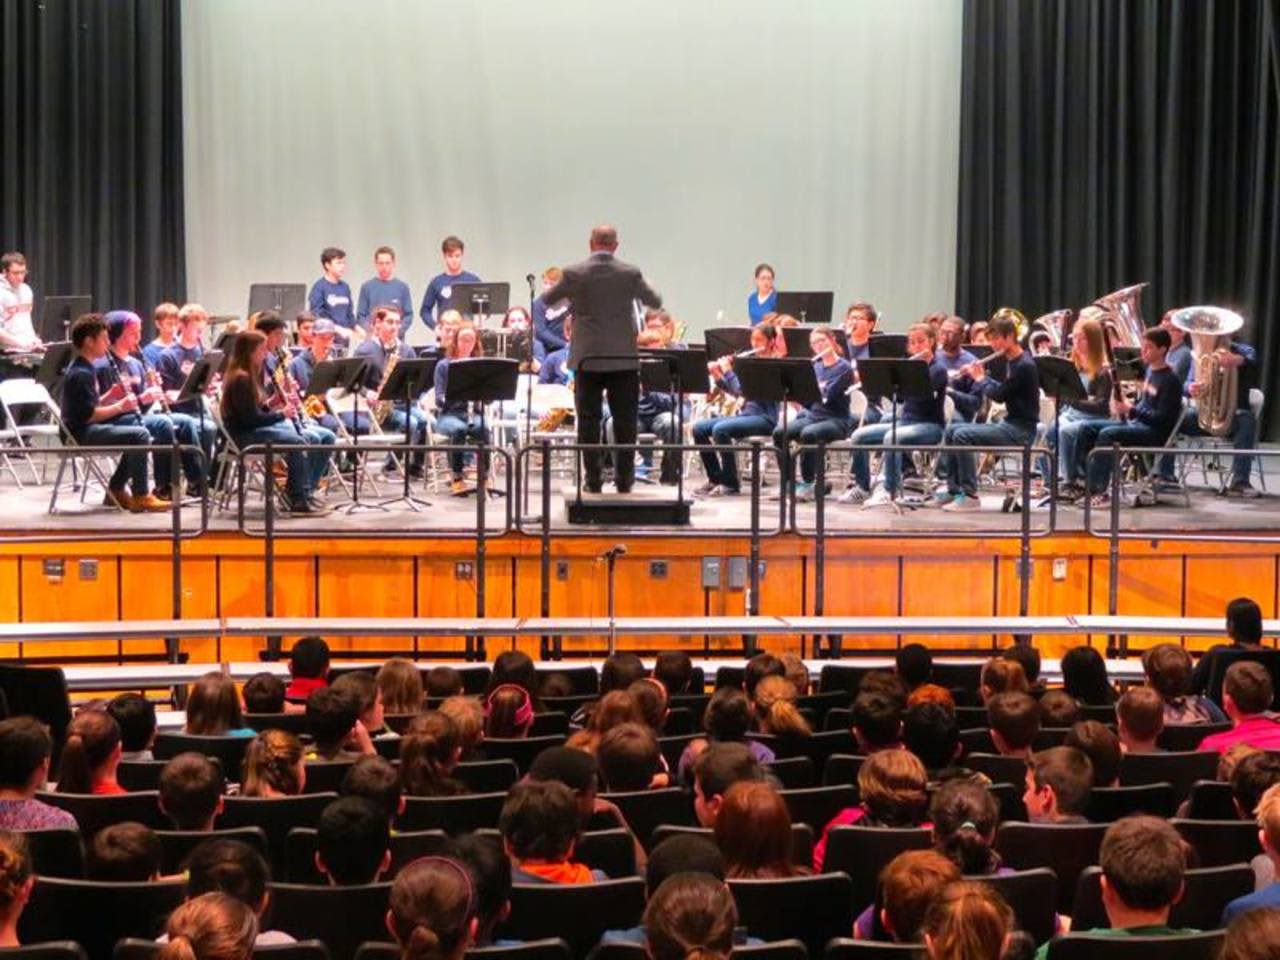 Briarcliff High School's band, orchestra and chorus perform for Todd Elementary School fifth-graders as part of Music in Our Schools last month.